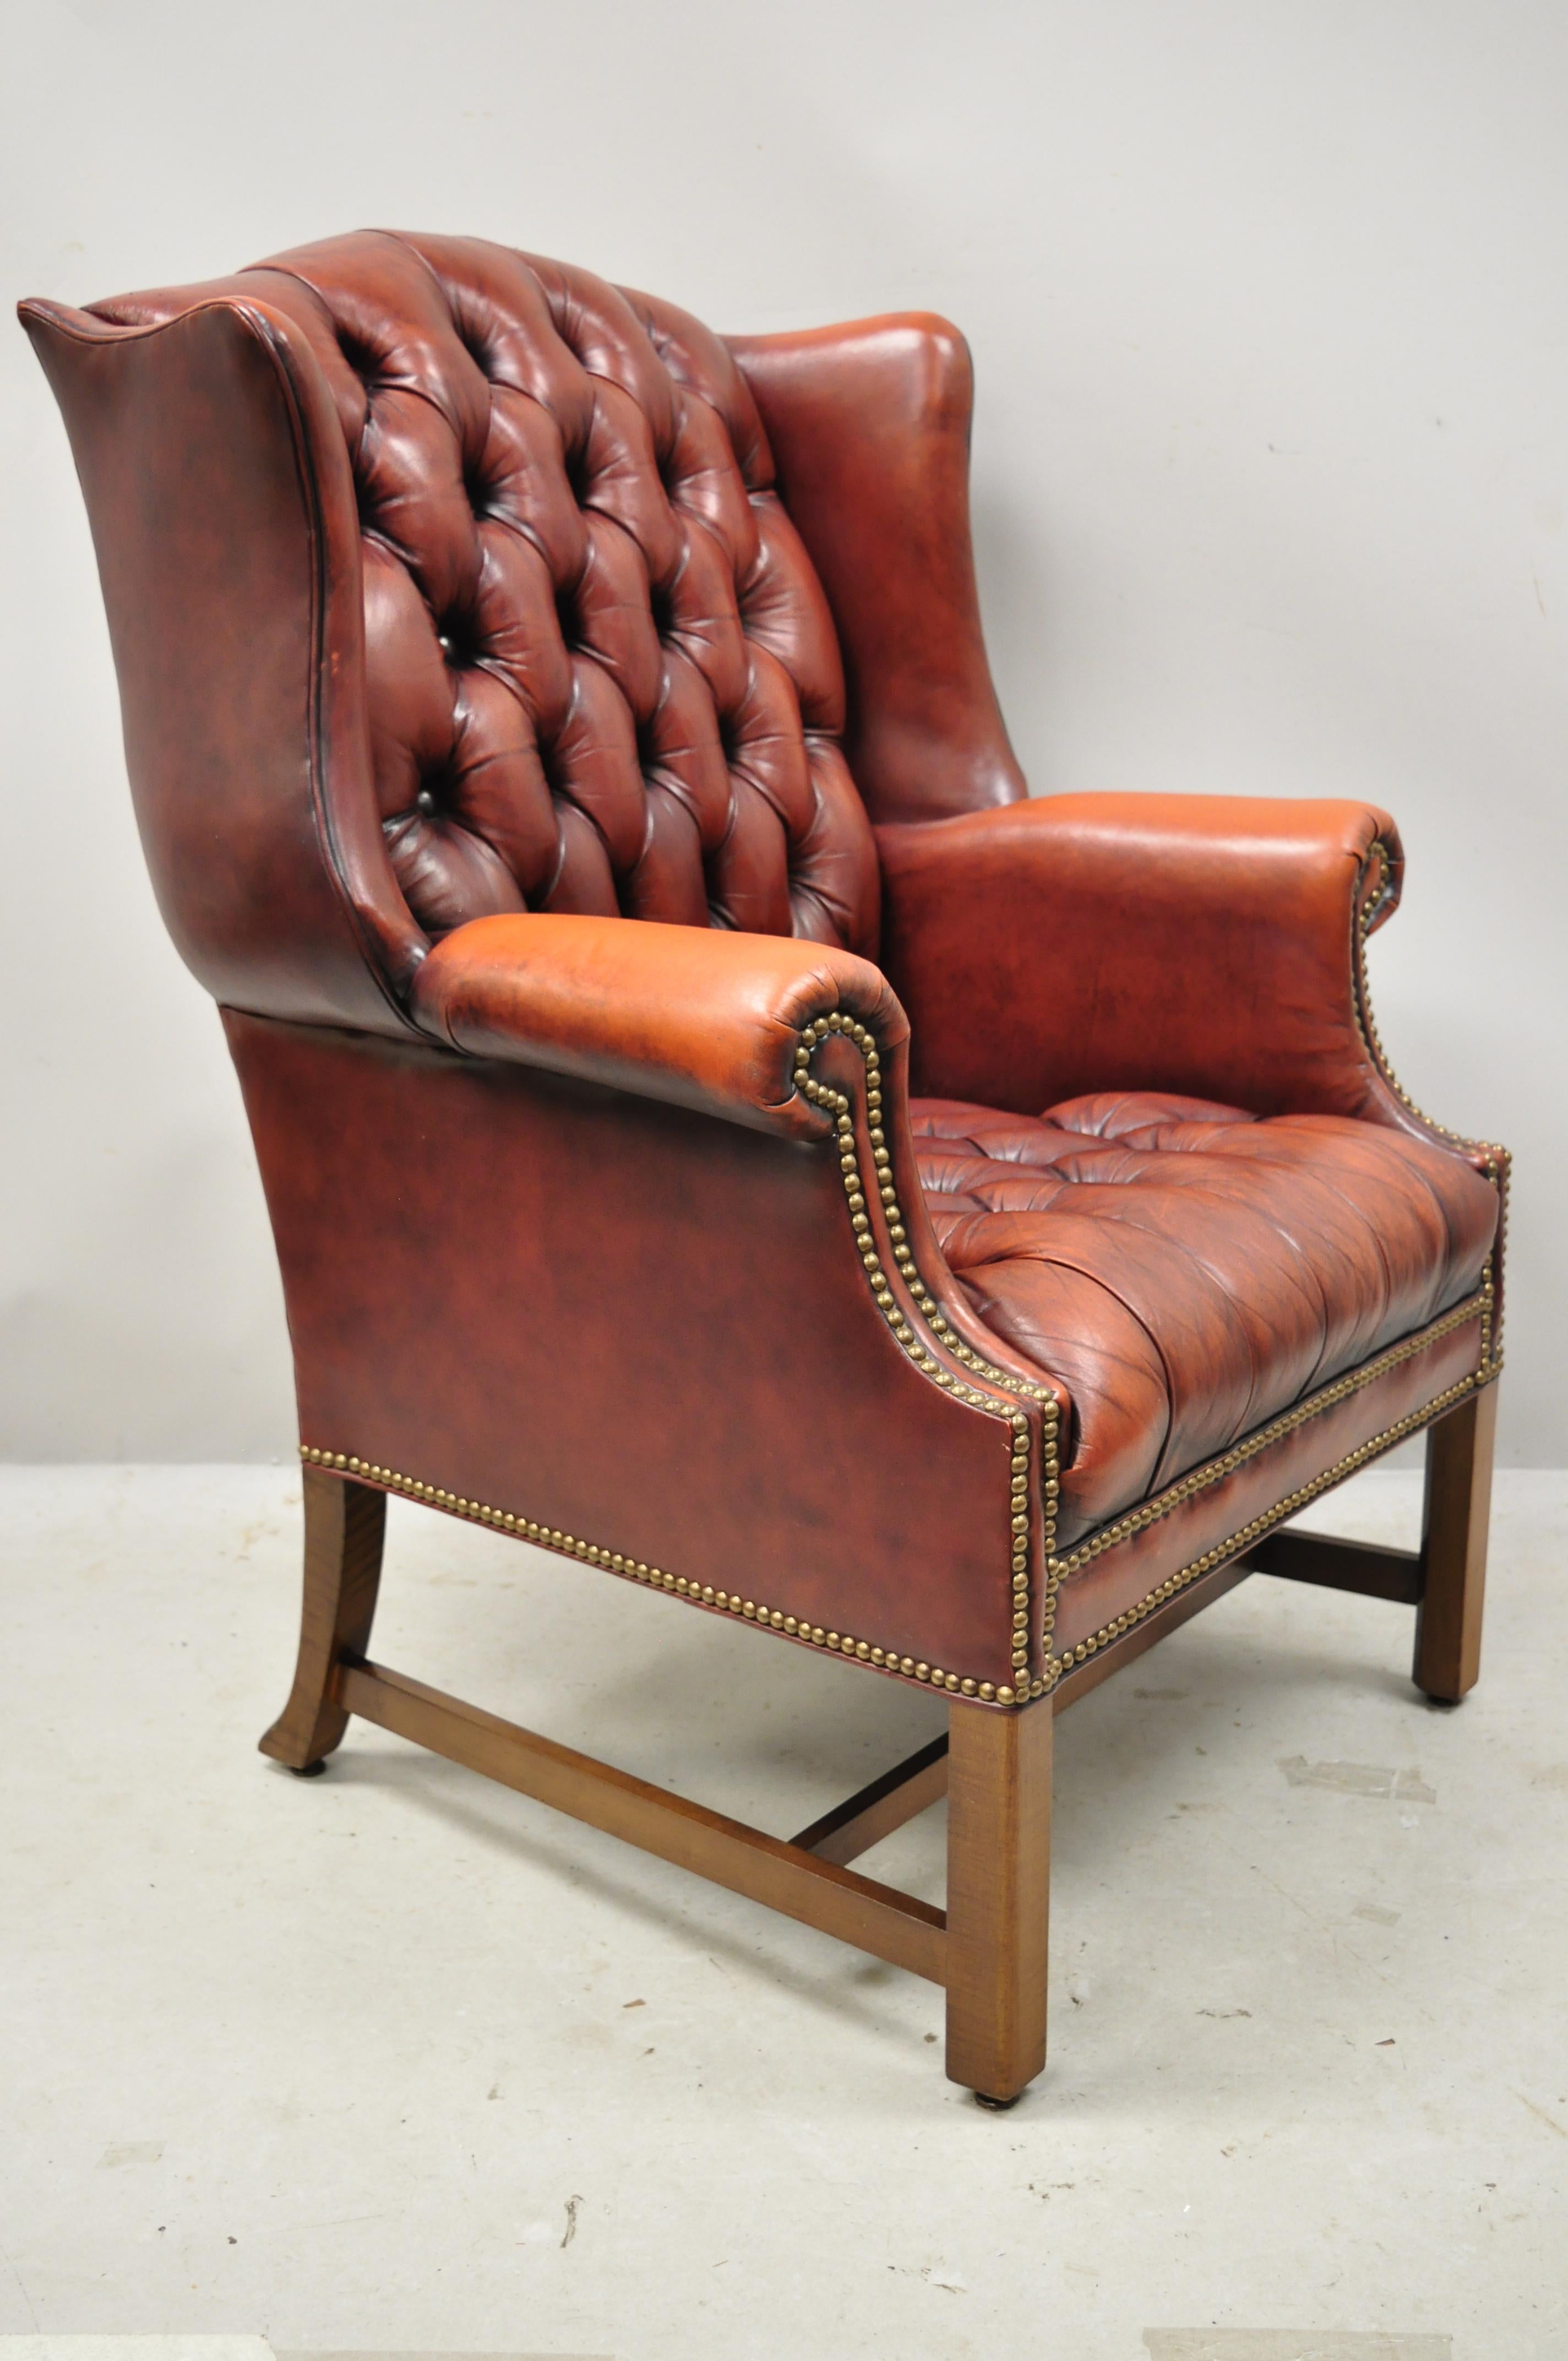 Vintage English Chesterfield style button tufted burgundy leather wingback chair. Item features button tufted leather upholstery, nailhead trim, remarkable patina, rolled arms, solid wood frame, distressed finish, quality American craftsmanship,